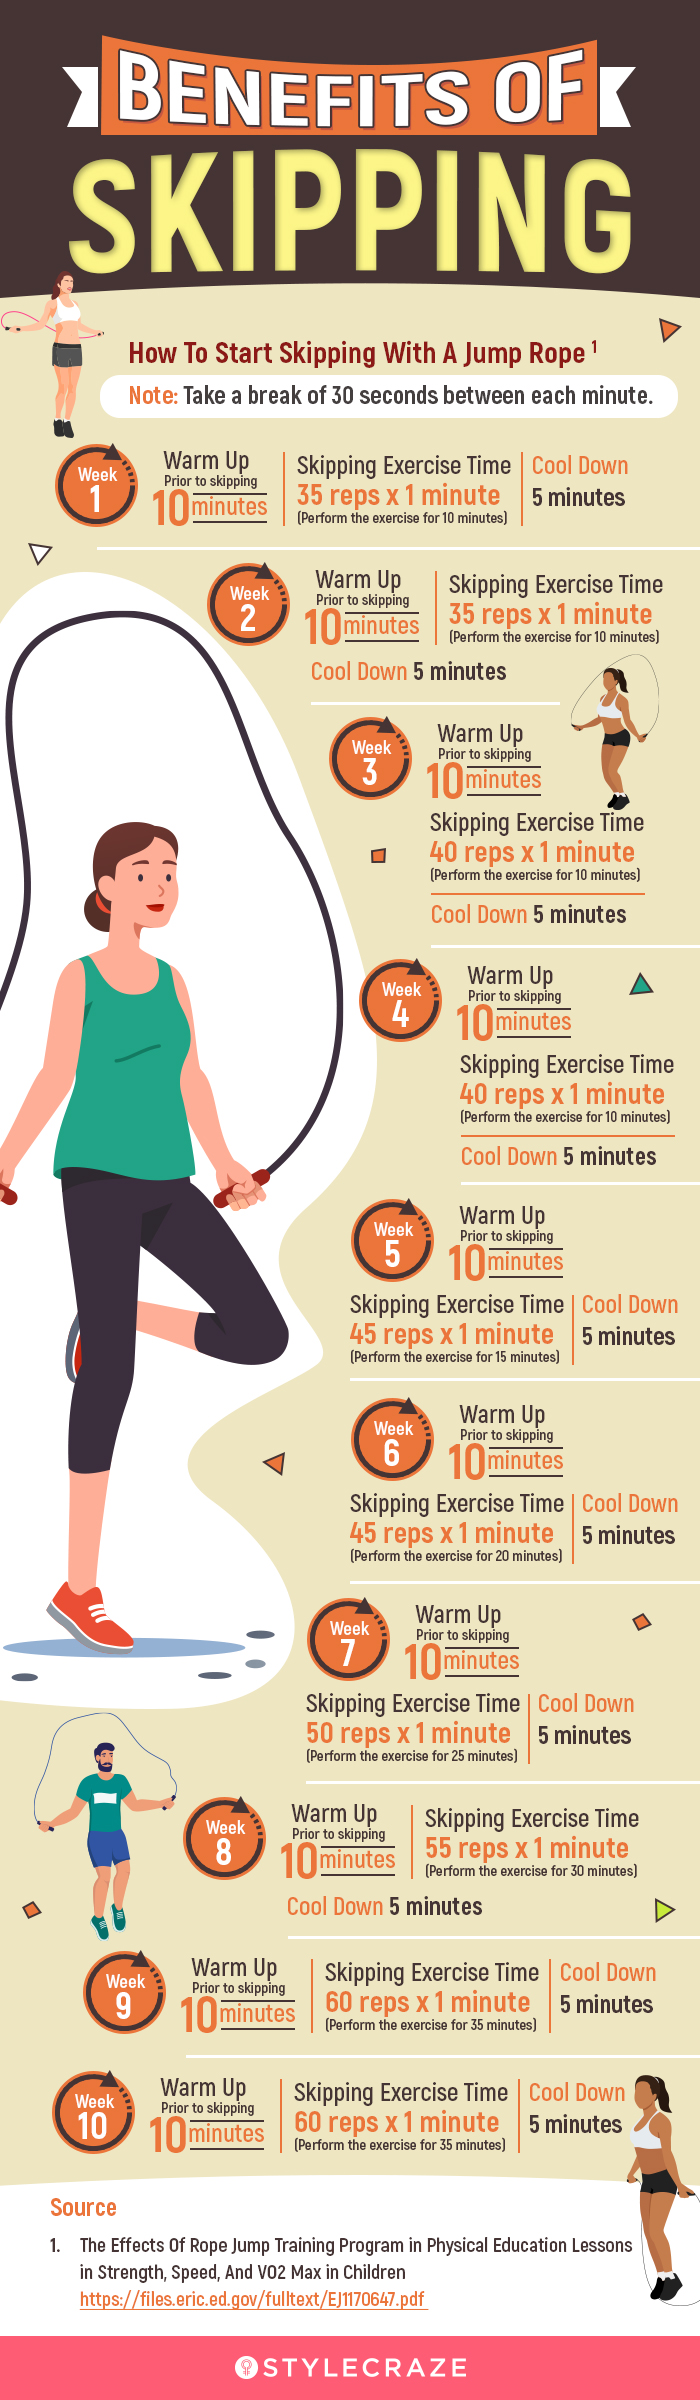 benefits of skipping [infographic]